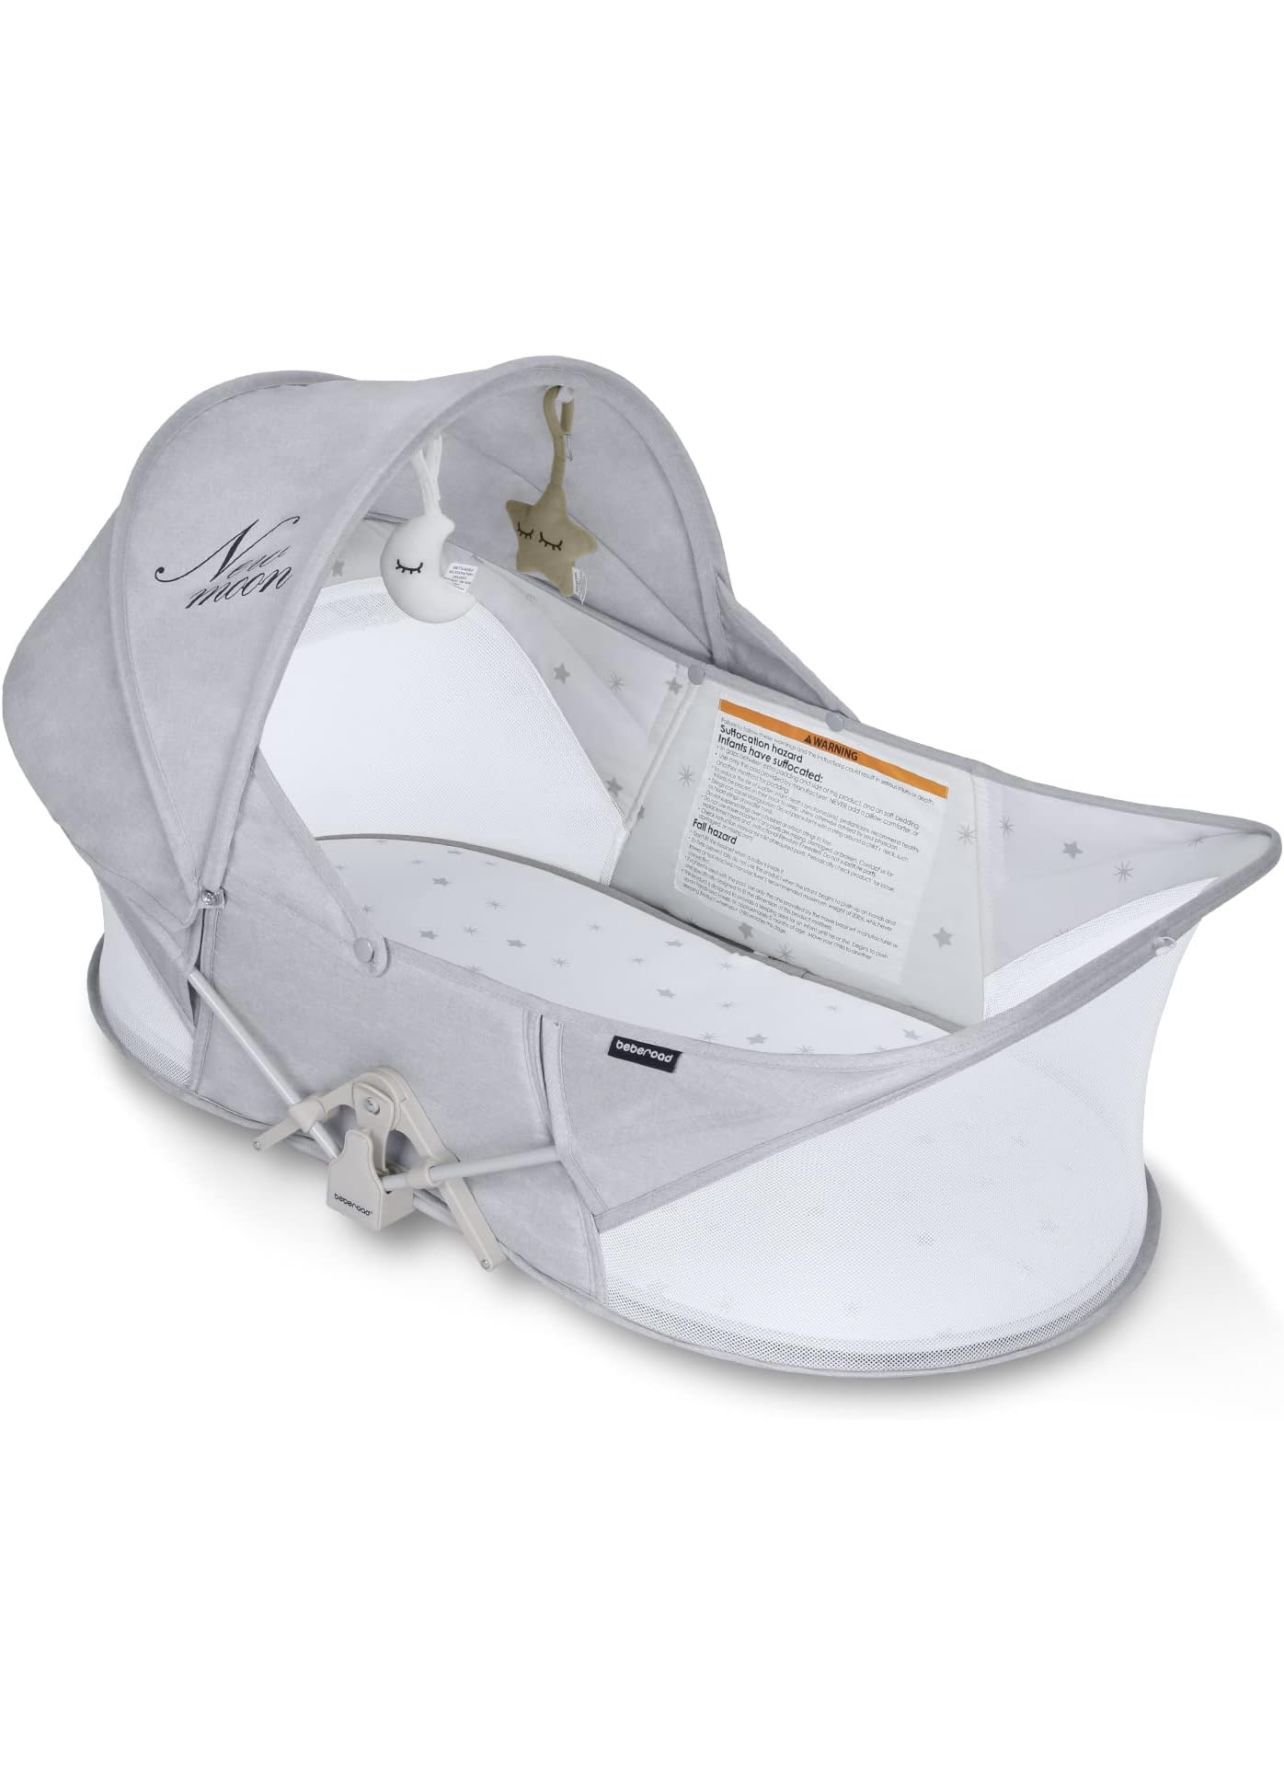 Beberoad Love Baby Travel Bassinet Portable Bassinet-Folding Baby Bassinet in Bed Mini Travel Crib Infant Travel Bed with Mosquito Net and Canopy Ligh